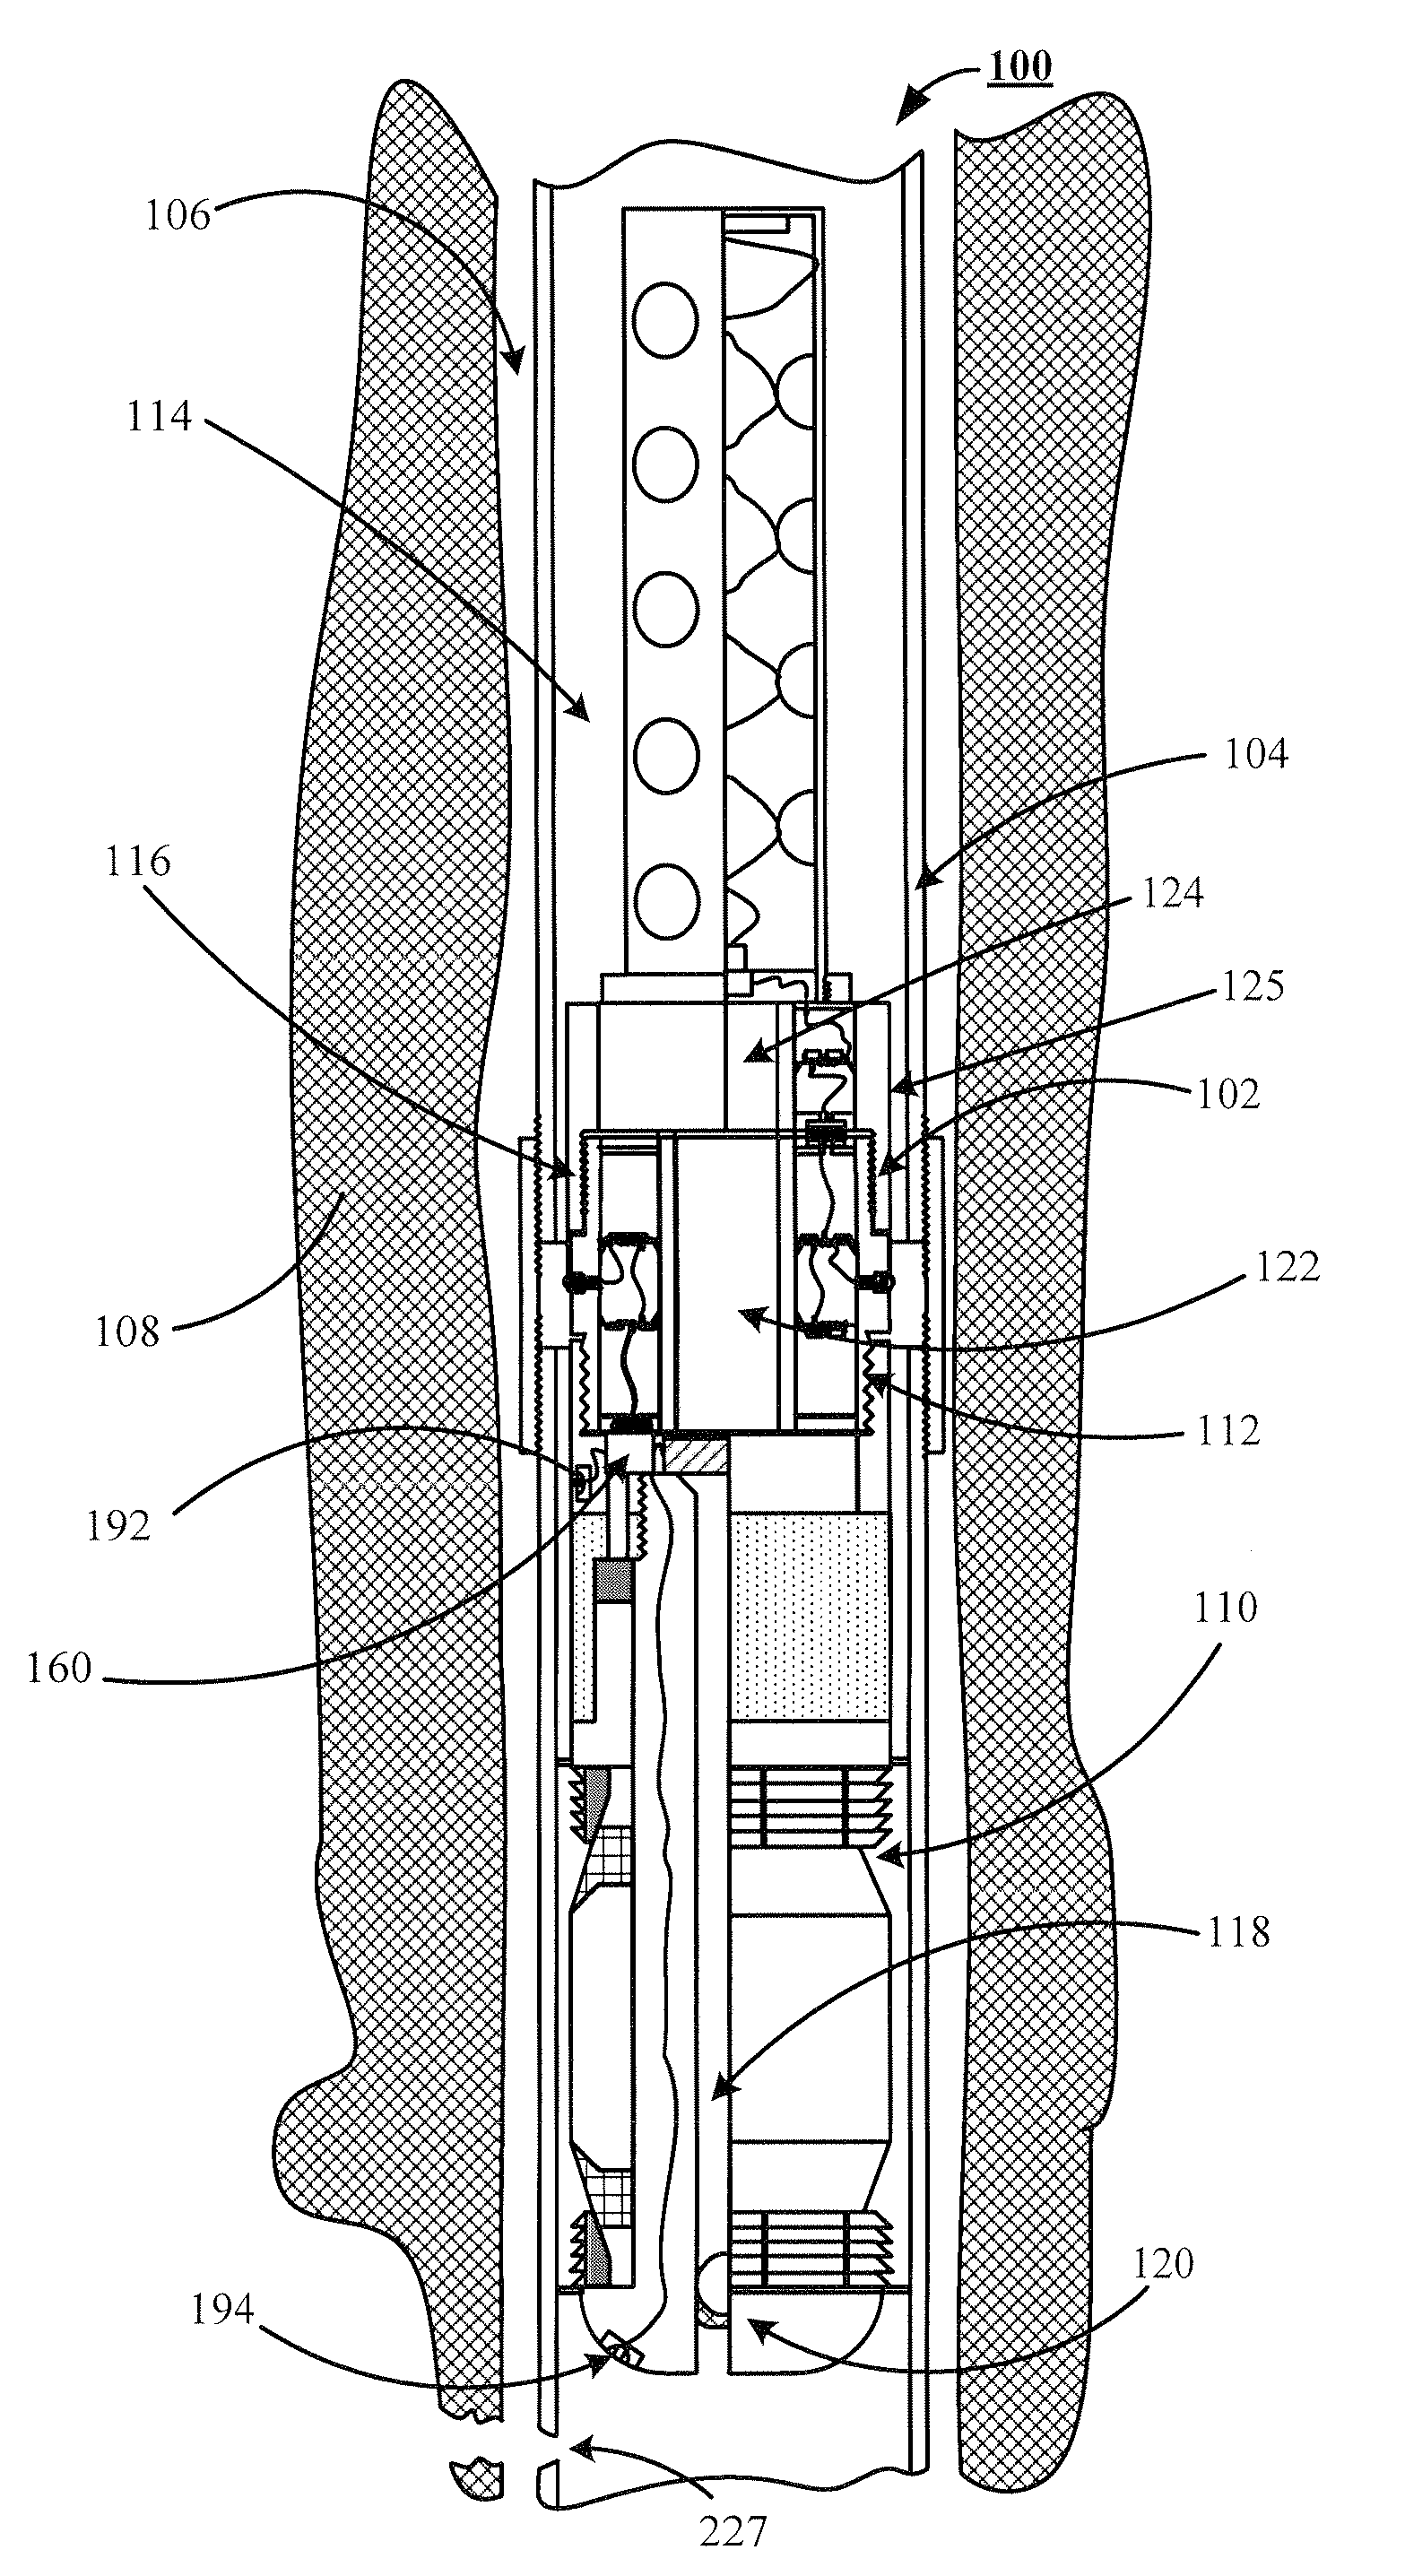 Downhole tool delivery system